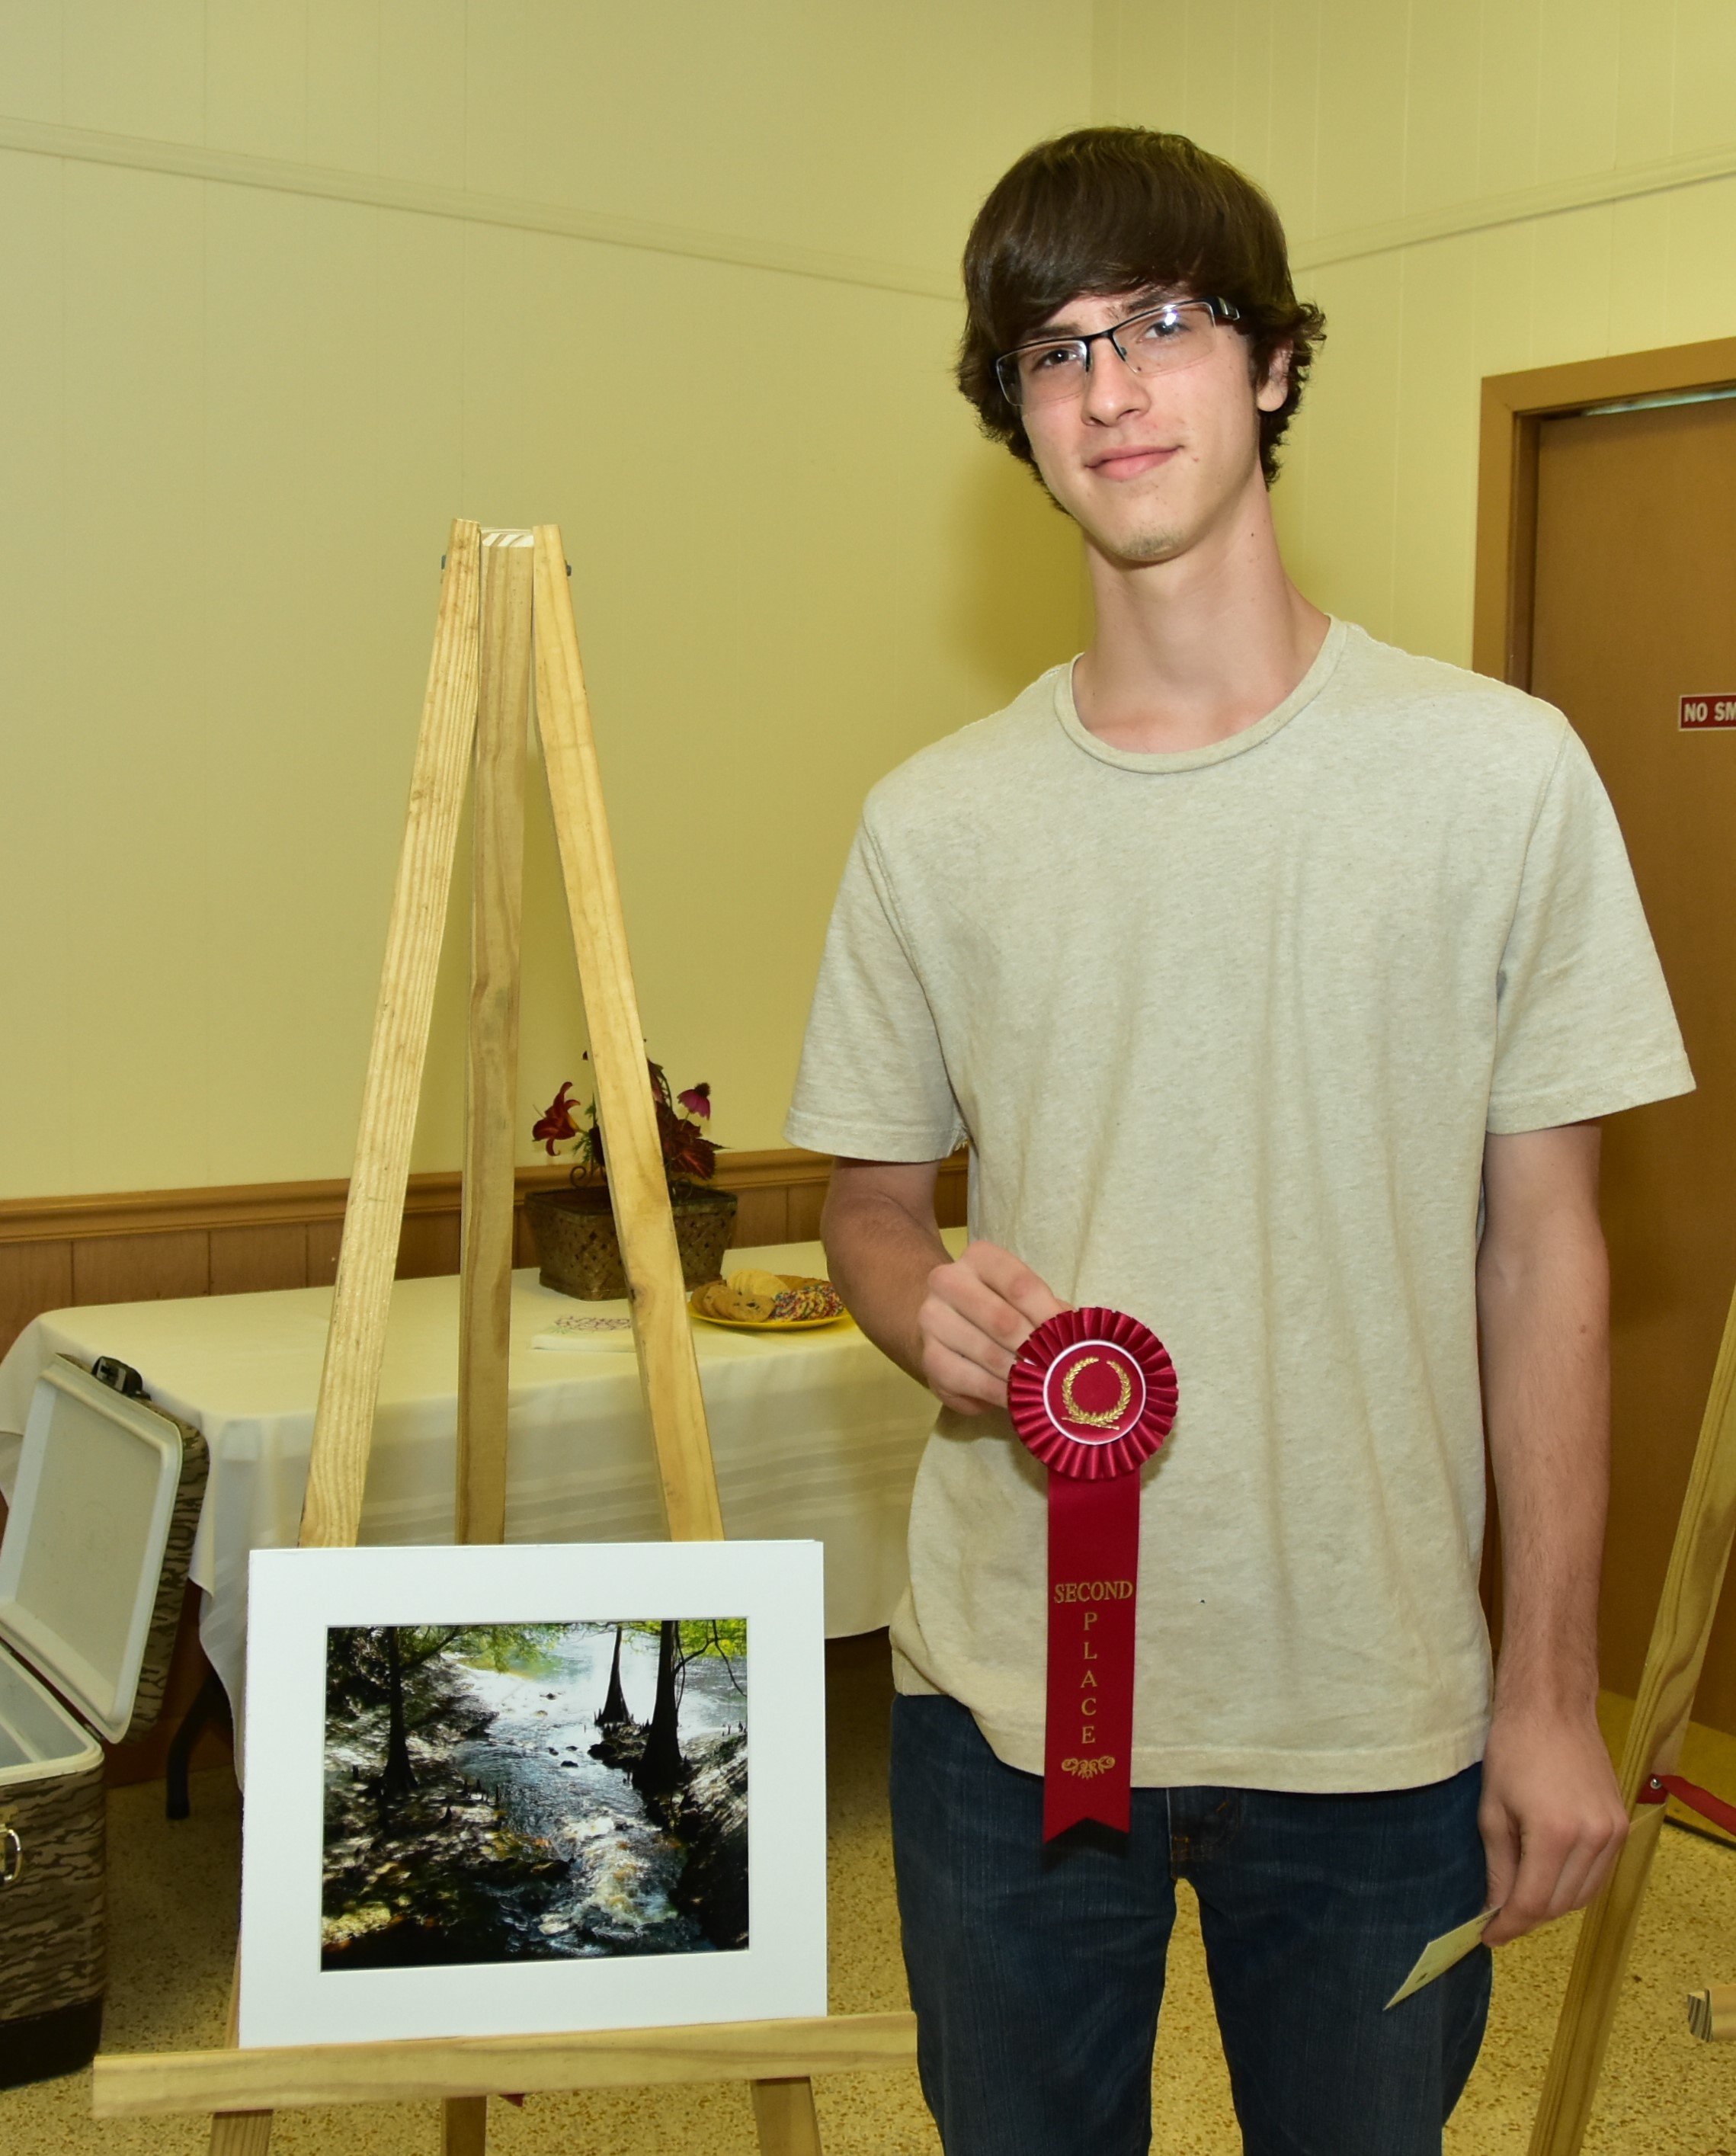 2278x2829 Second Place, Ben Bowman from Branford High School, in Winning Students, by Rob Wolfe, 23 May 2016